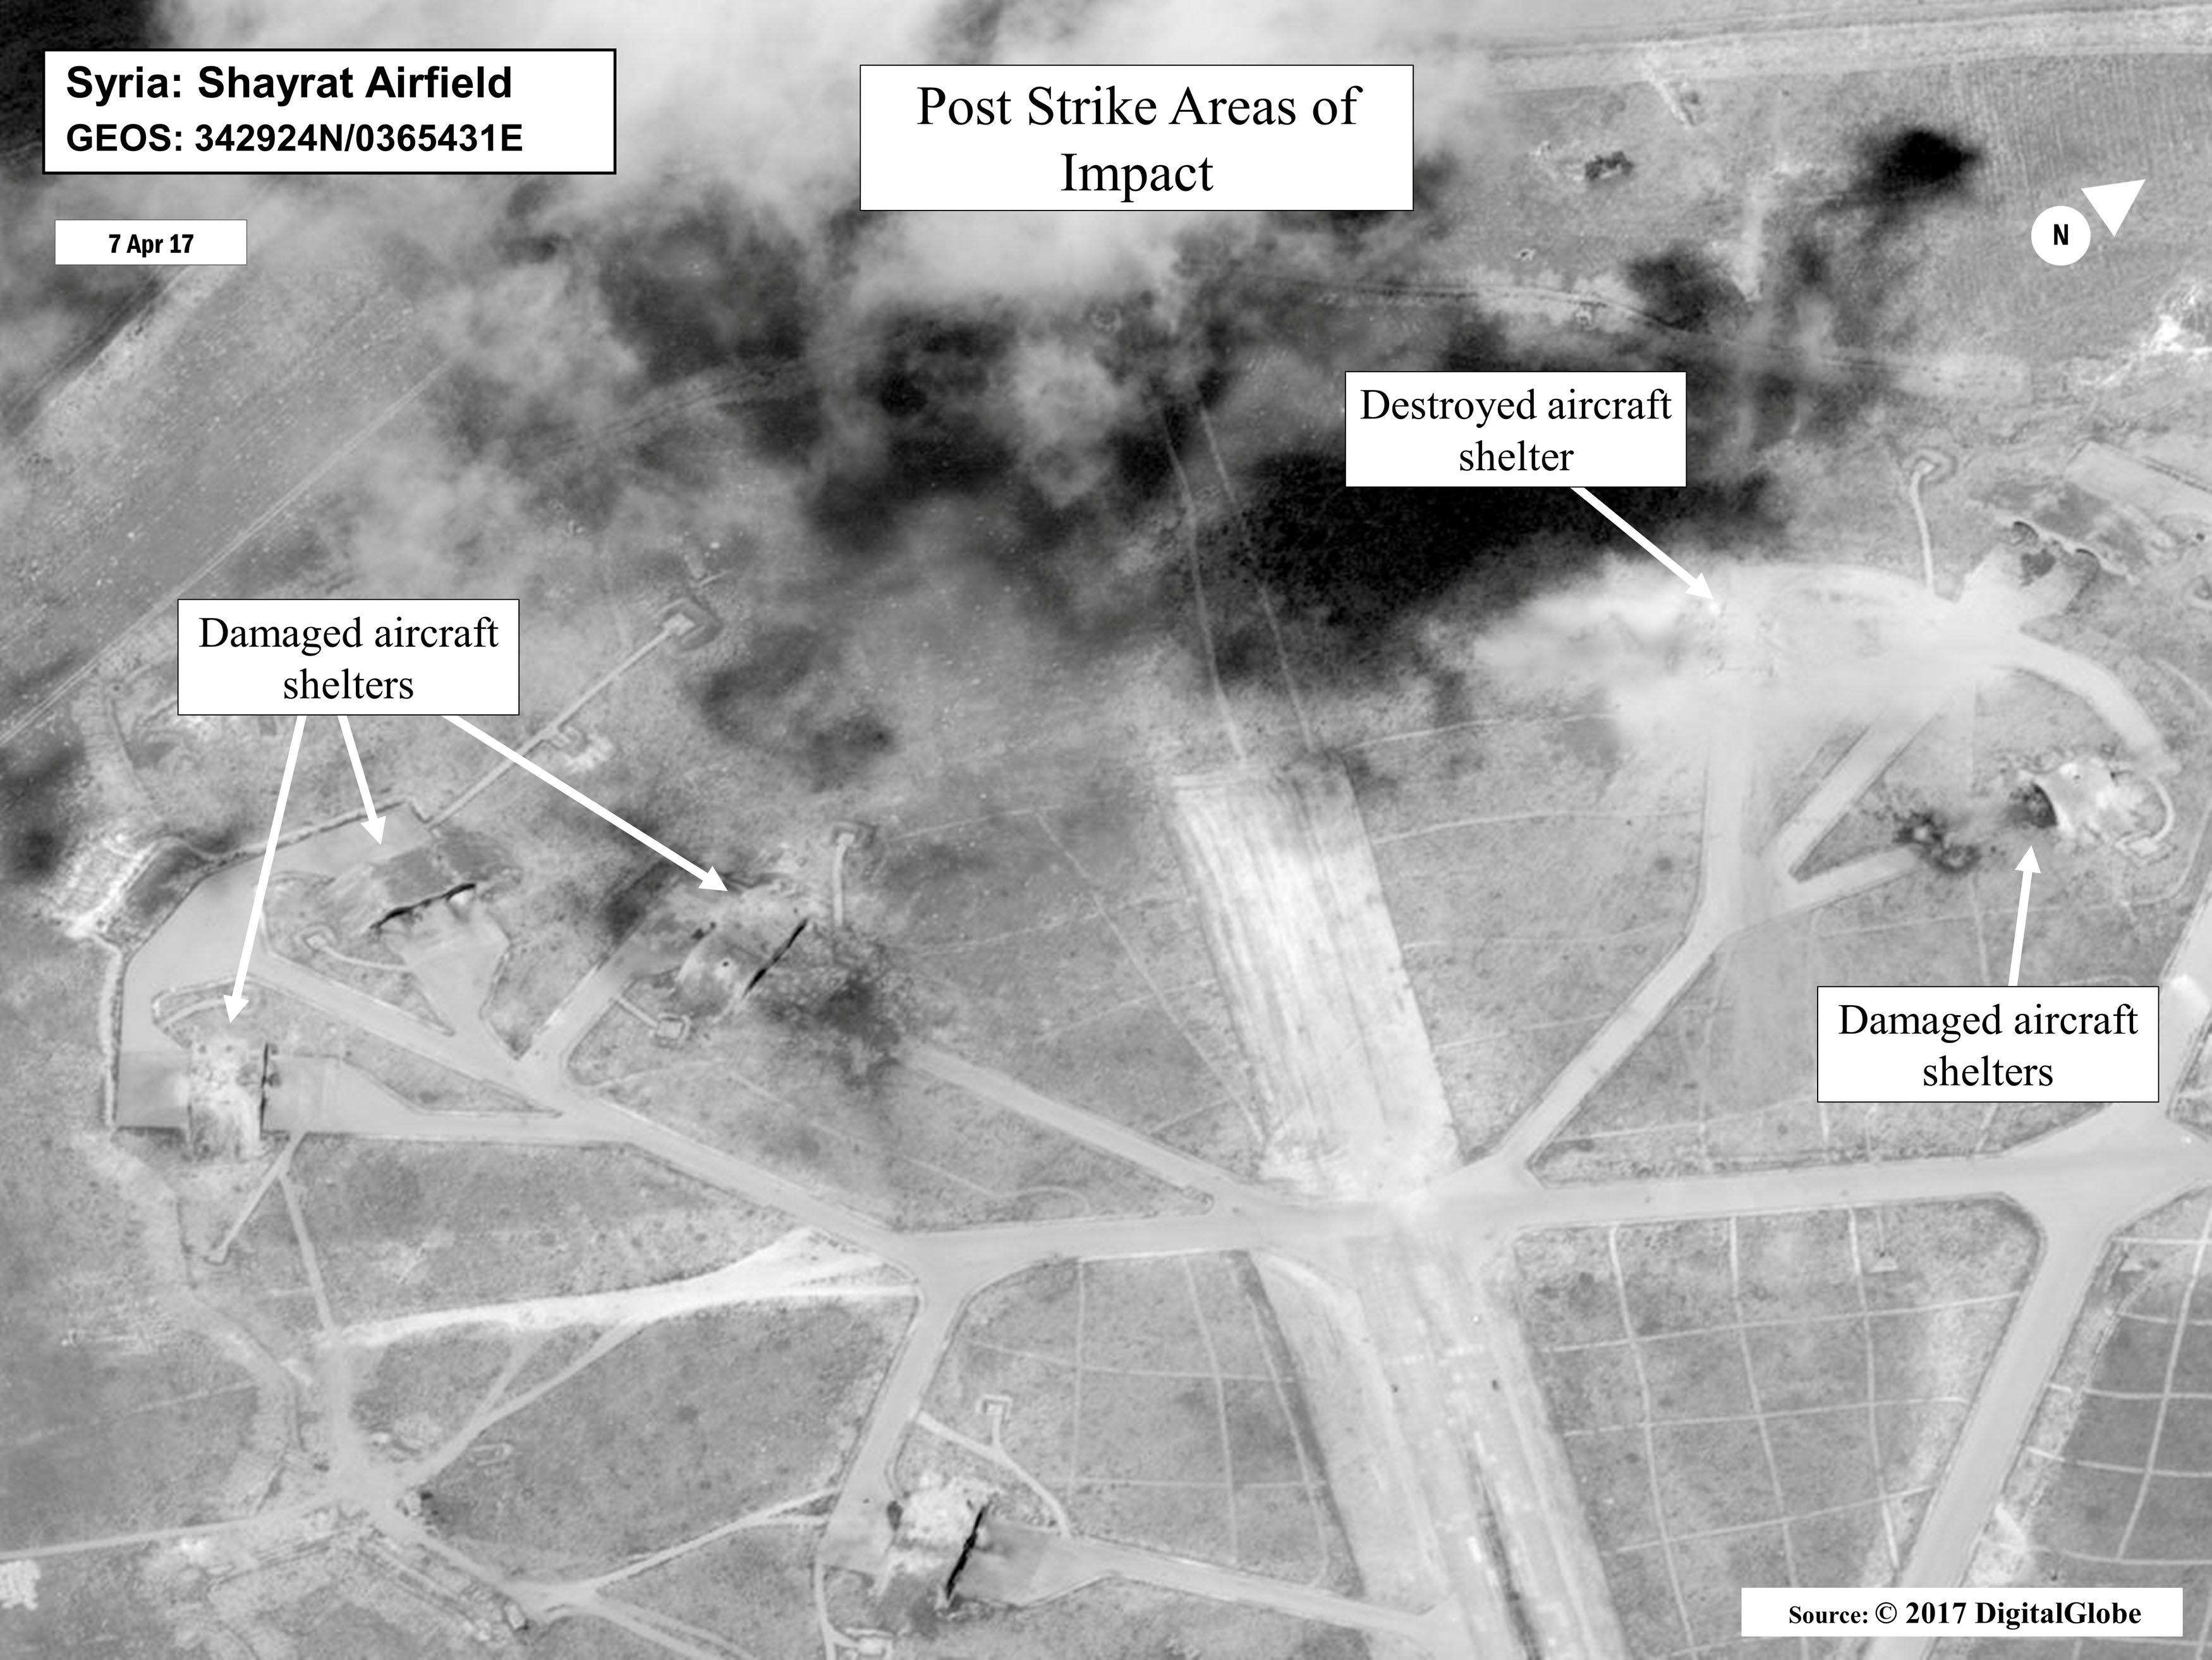 Battle damage assessment image of Shayrat Airfield, Syria, is seen in this DigitalGlobe satellite image, released by the Pentagon following US Tomahawk Land Attack Missile strikes from Arleigh Burke-class guided-missile destroyers, the USS Ross and USS Porter on April 7, 2017. Photo: DigitalGlobe/Courtesy US Department of Defense/Handout via Reuters